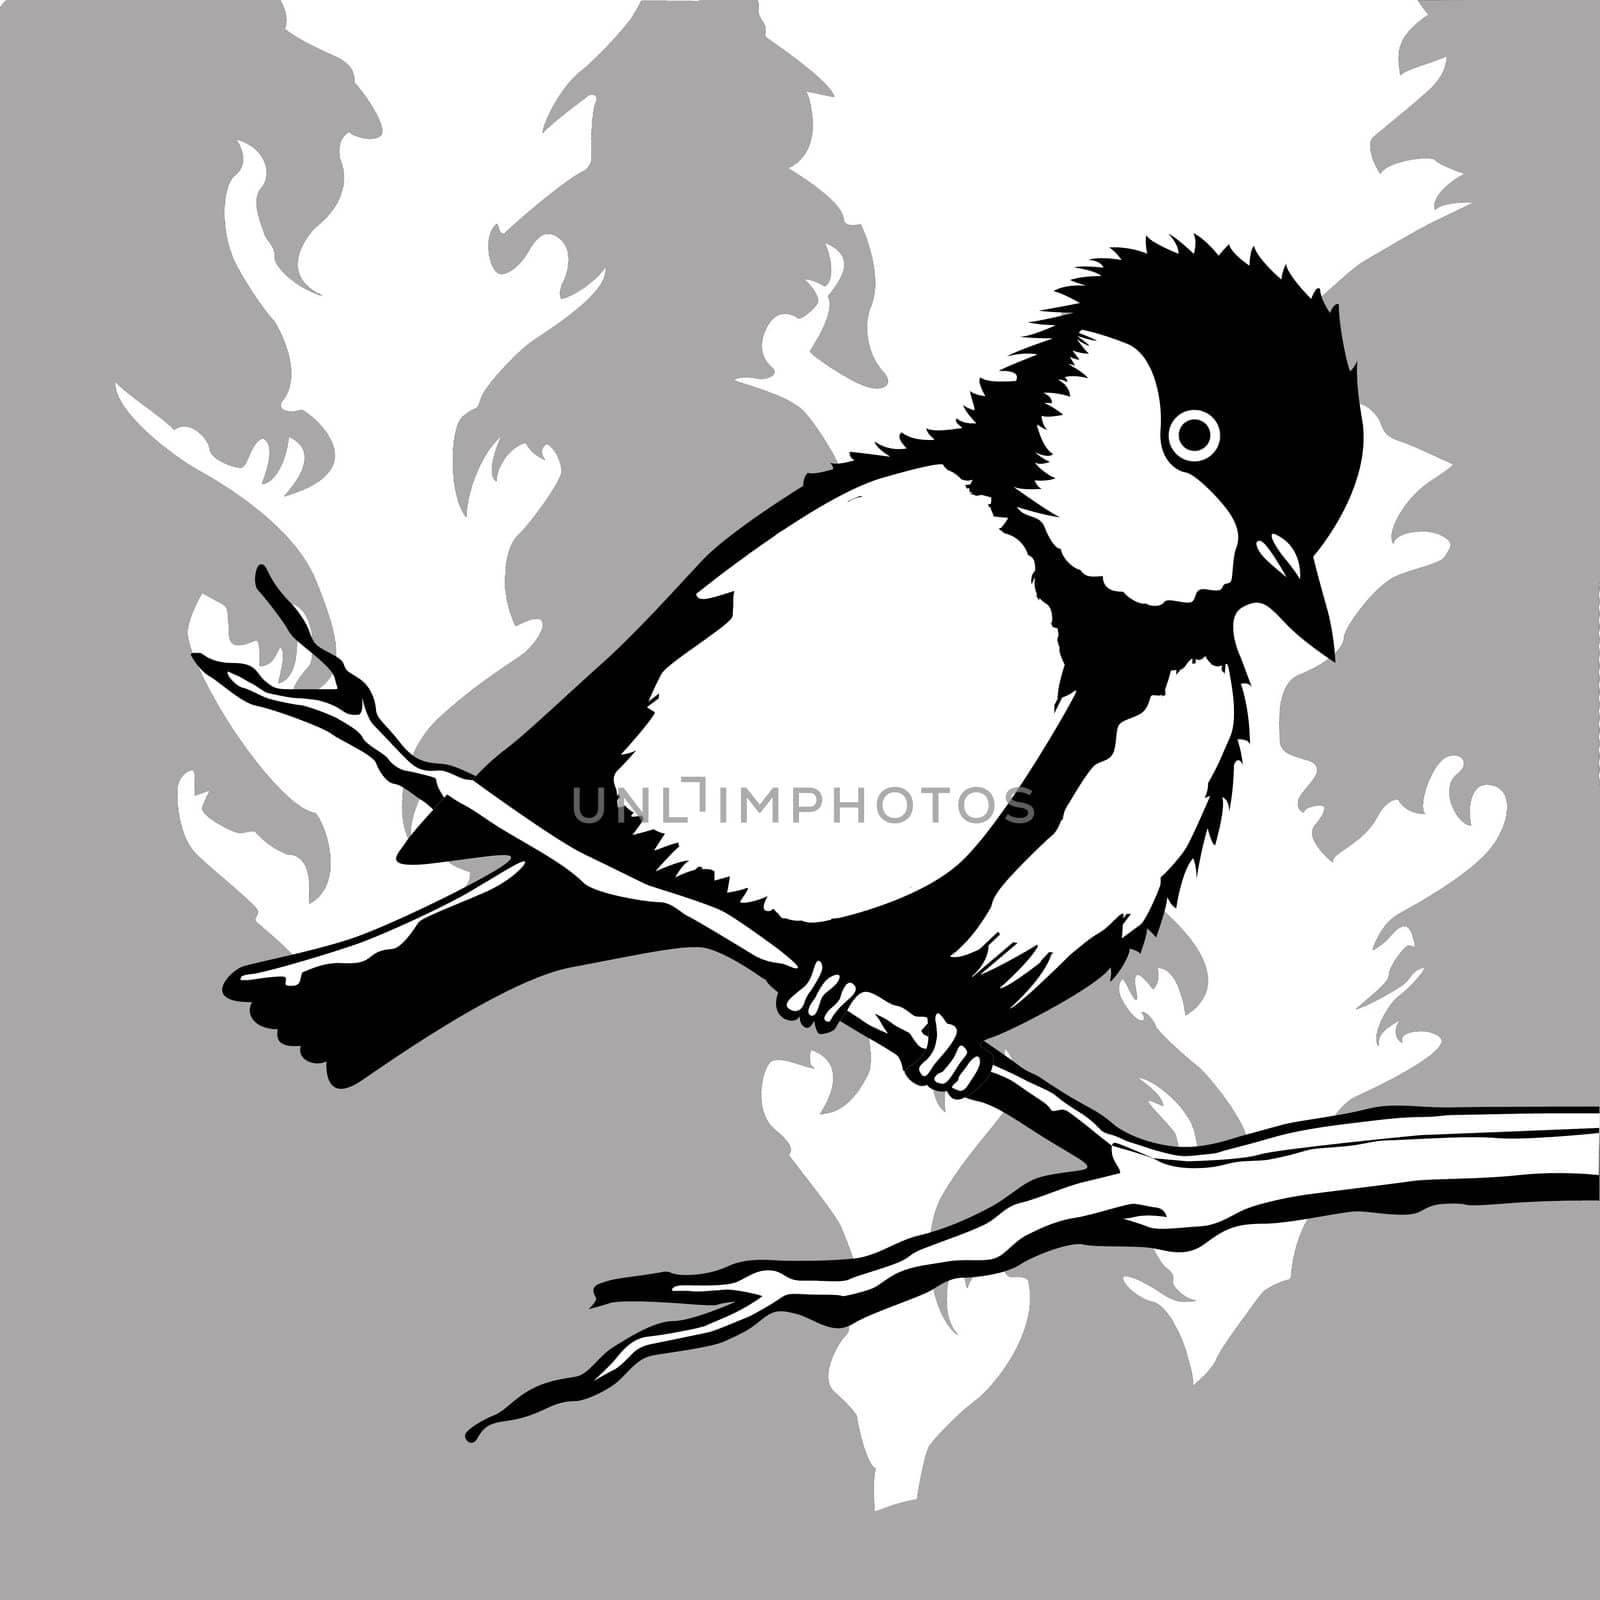 bird silhouette on wood background, vector illustration by basel101658